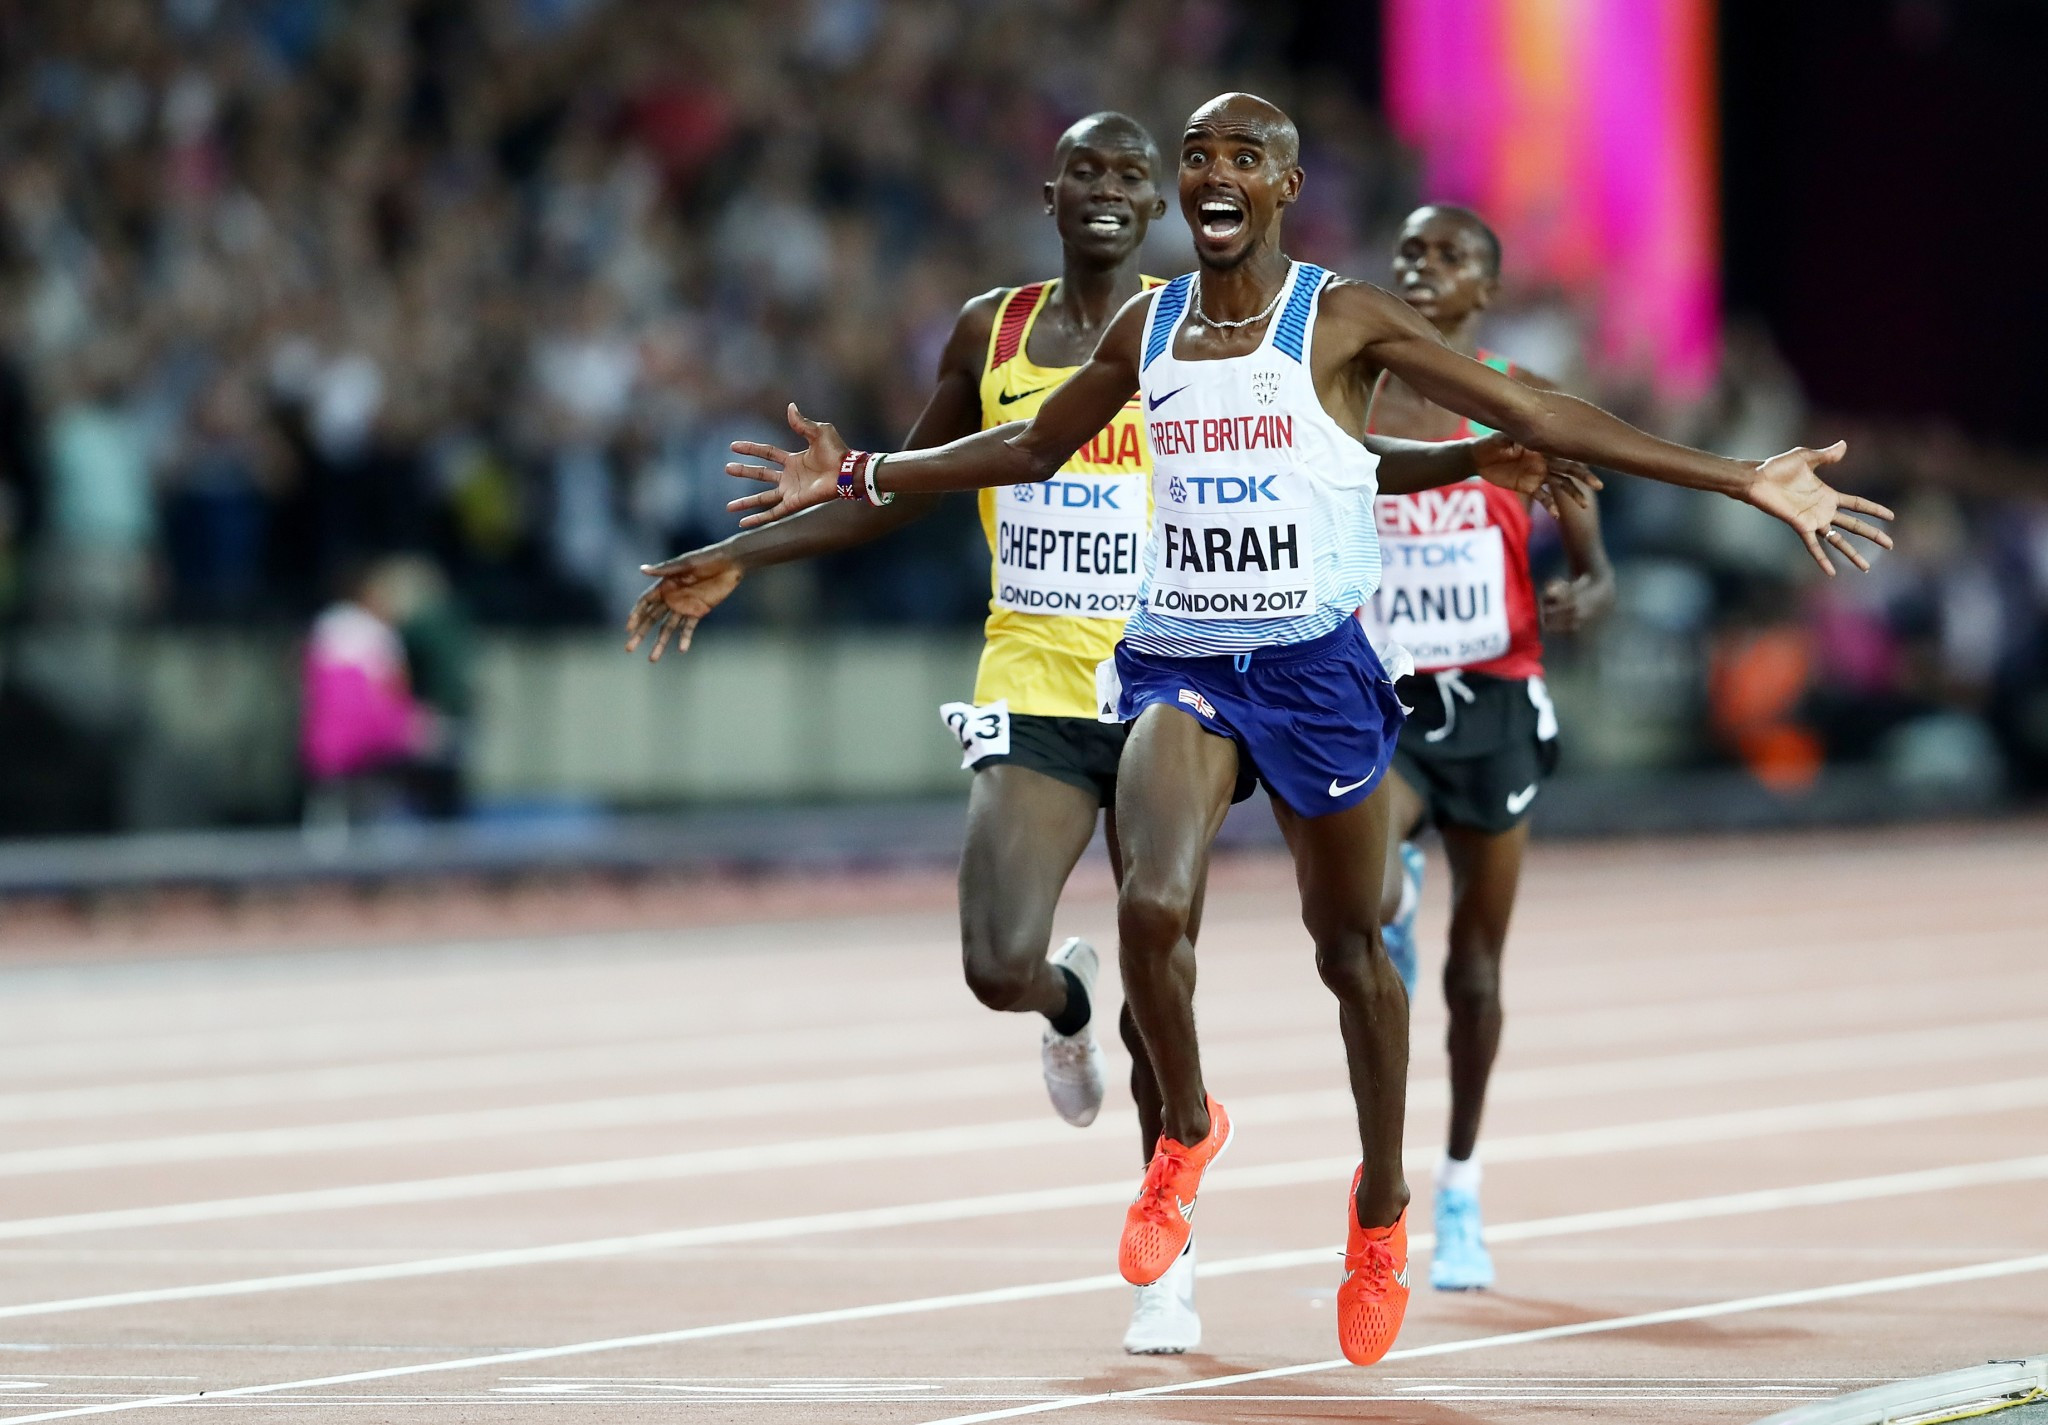 Farah lights-up home crowd to win first gold medal at IAAF World Championships